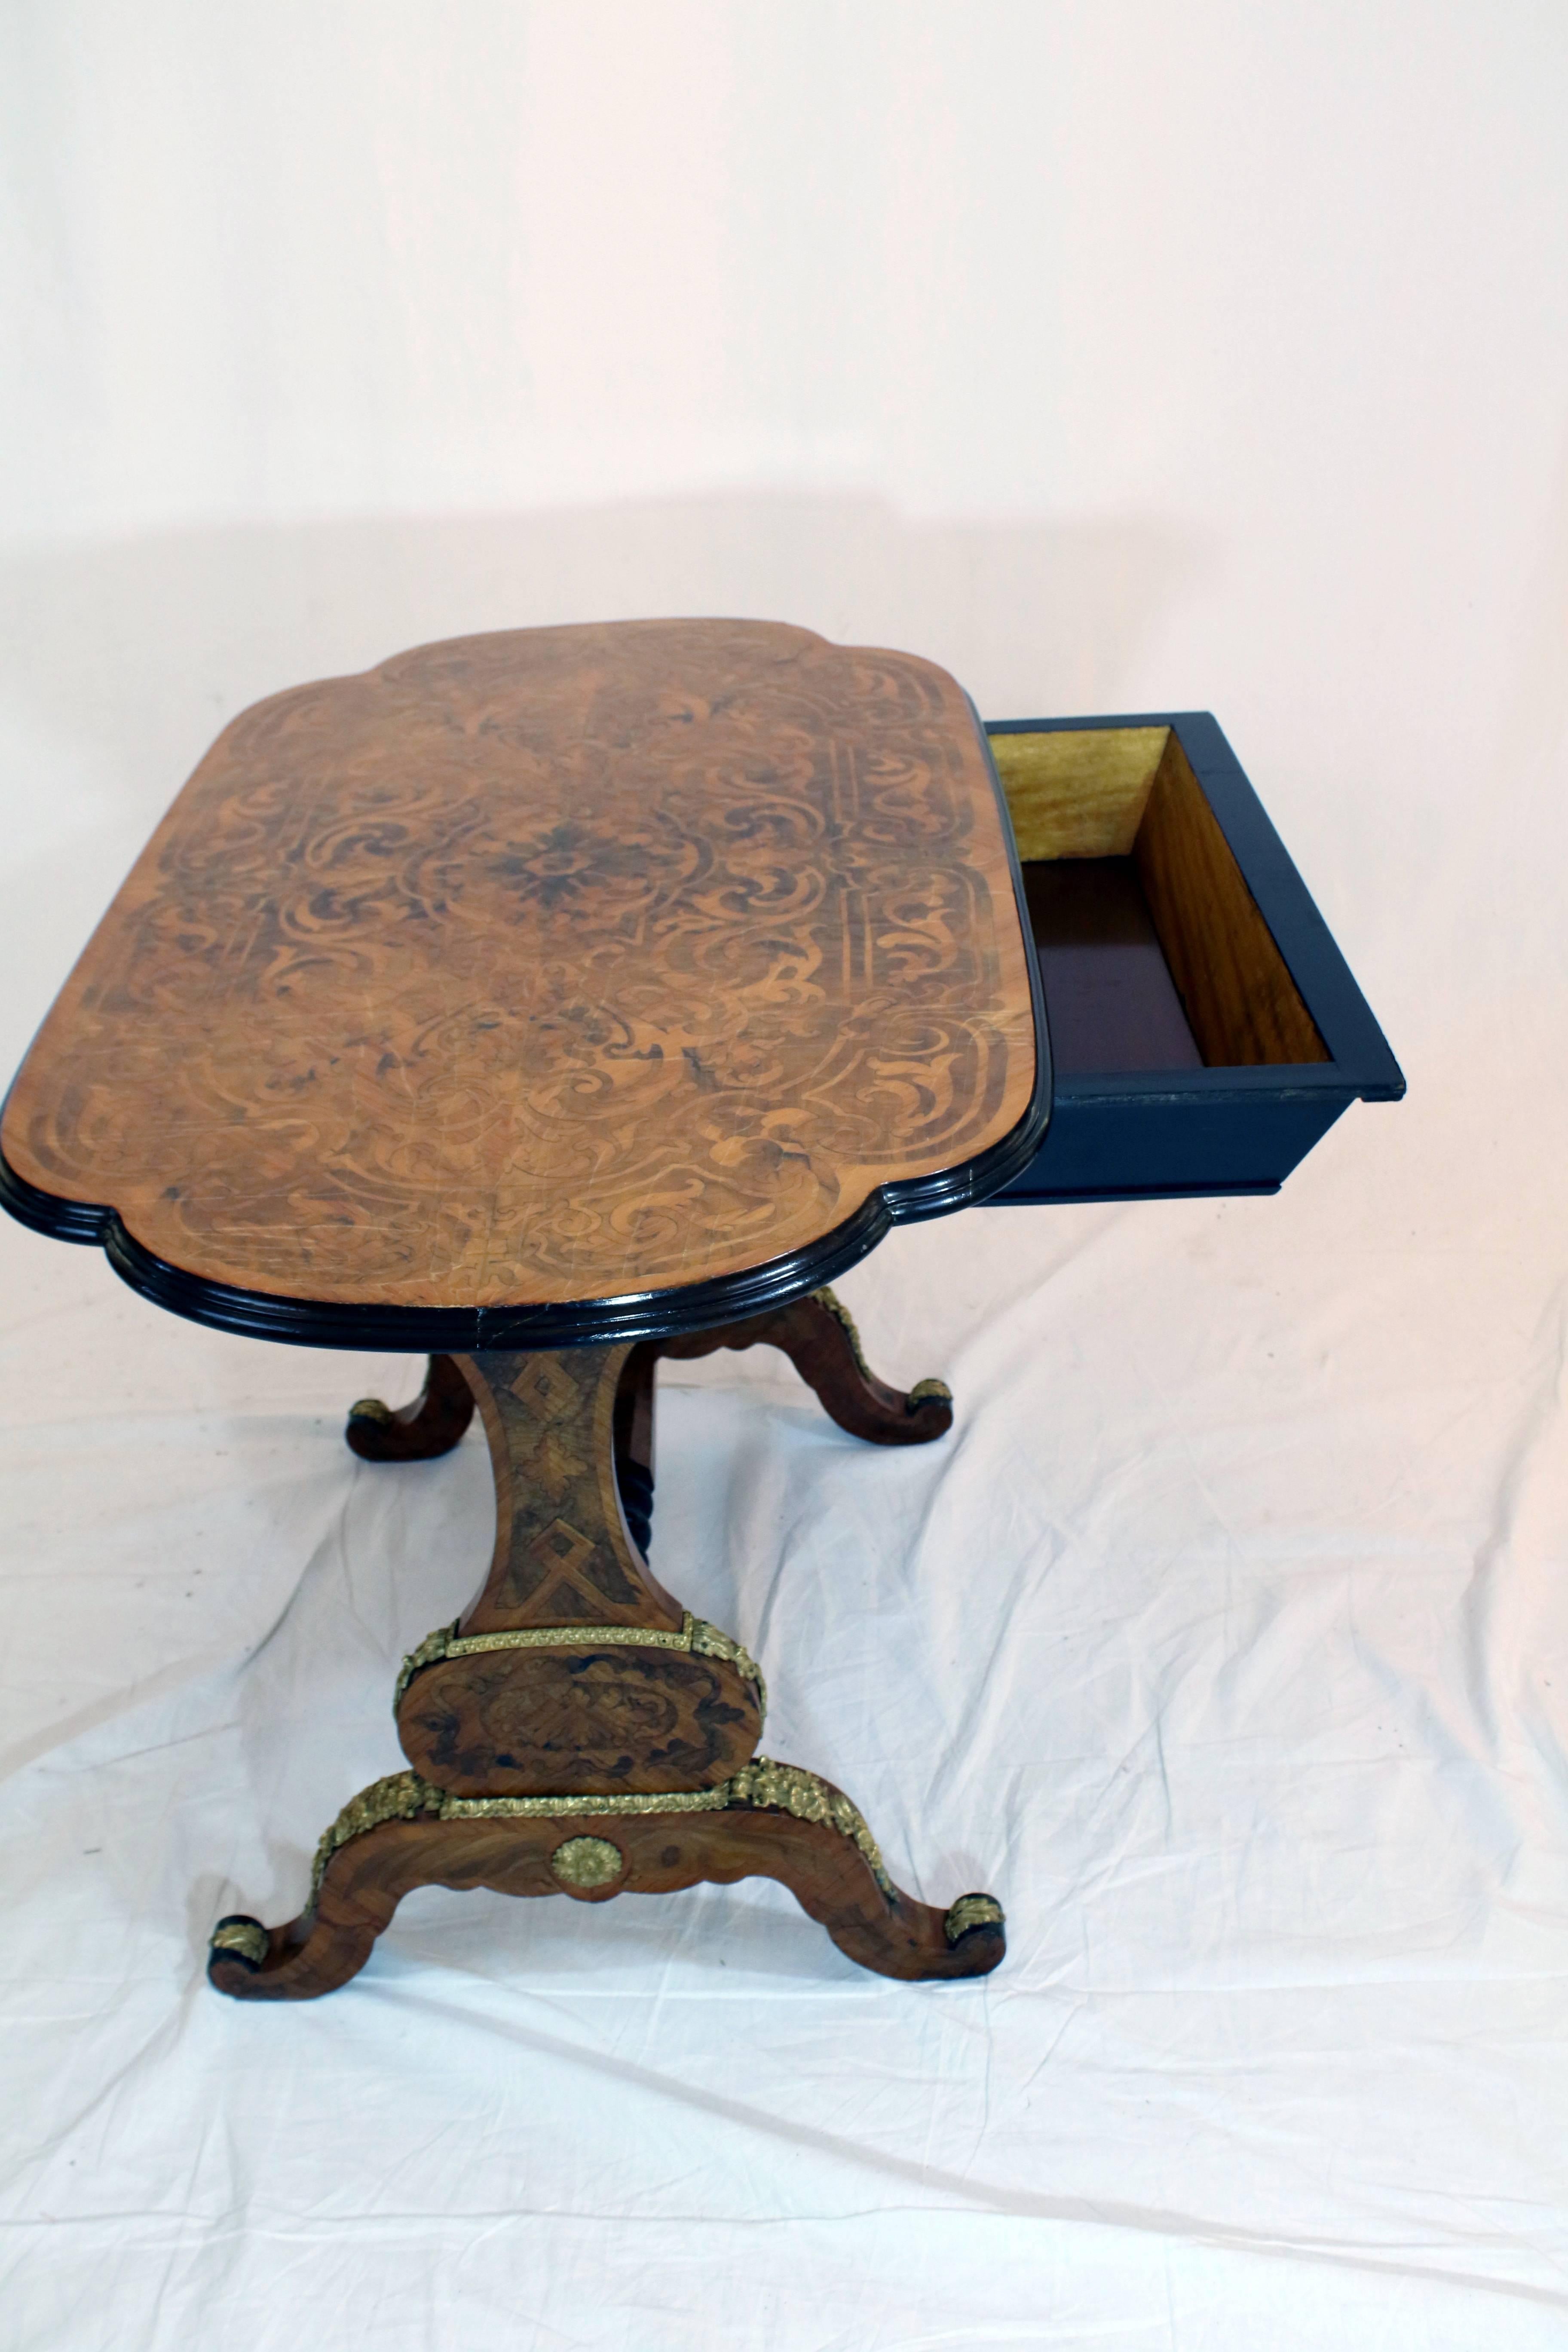 A fine quality 19th century Louis XV style tea table having wonderfully detailed scenes of scrolled foliates to the varnished table top, the interior and exterior sides. A discreet mahogany-lined drawer slides gently on underside wood railing to